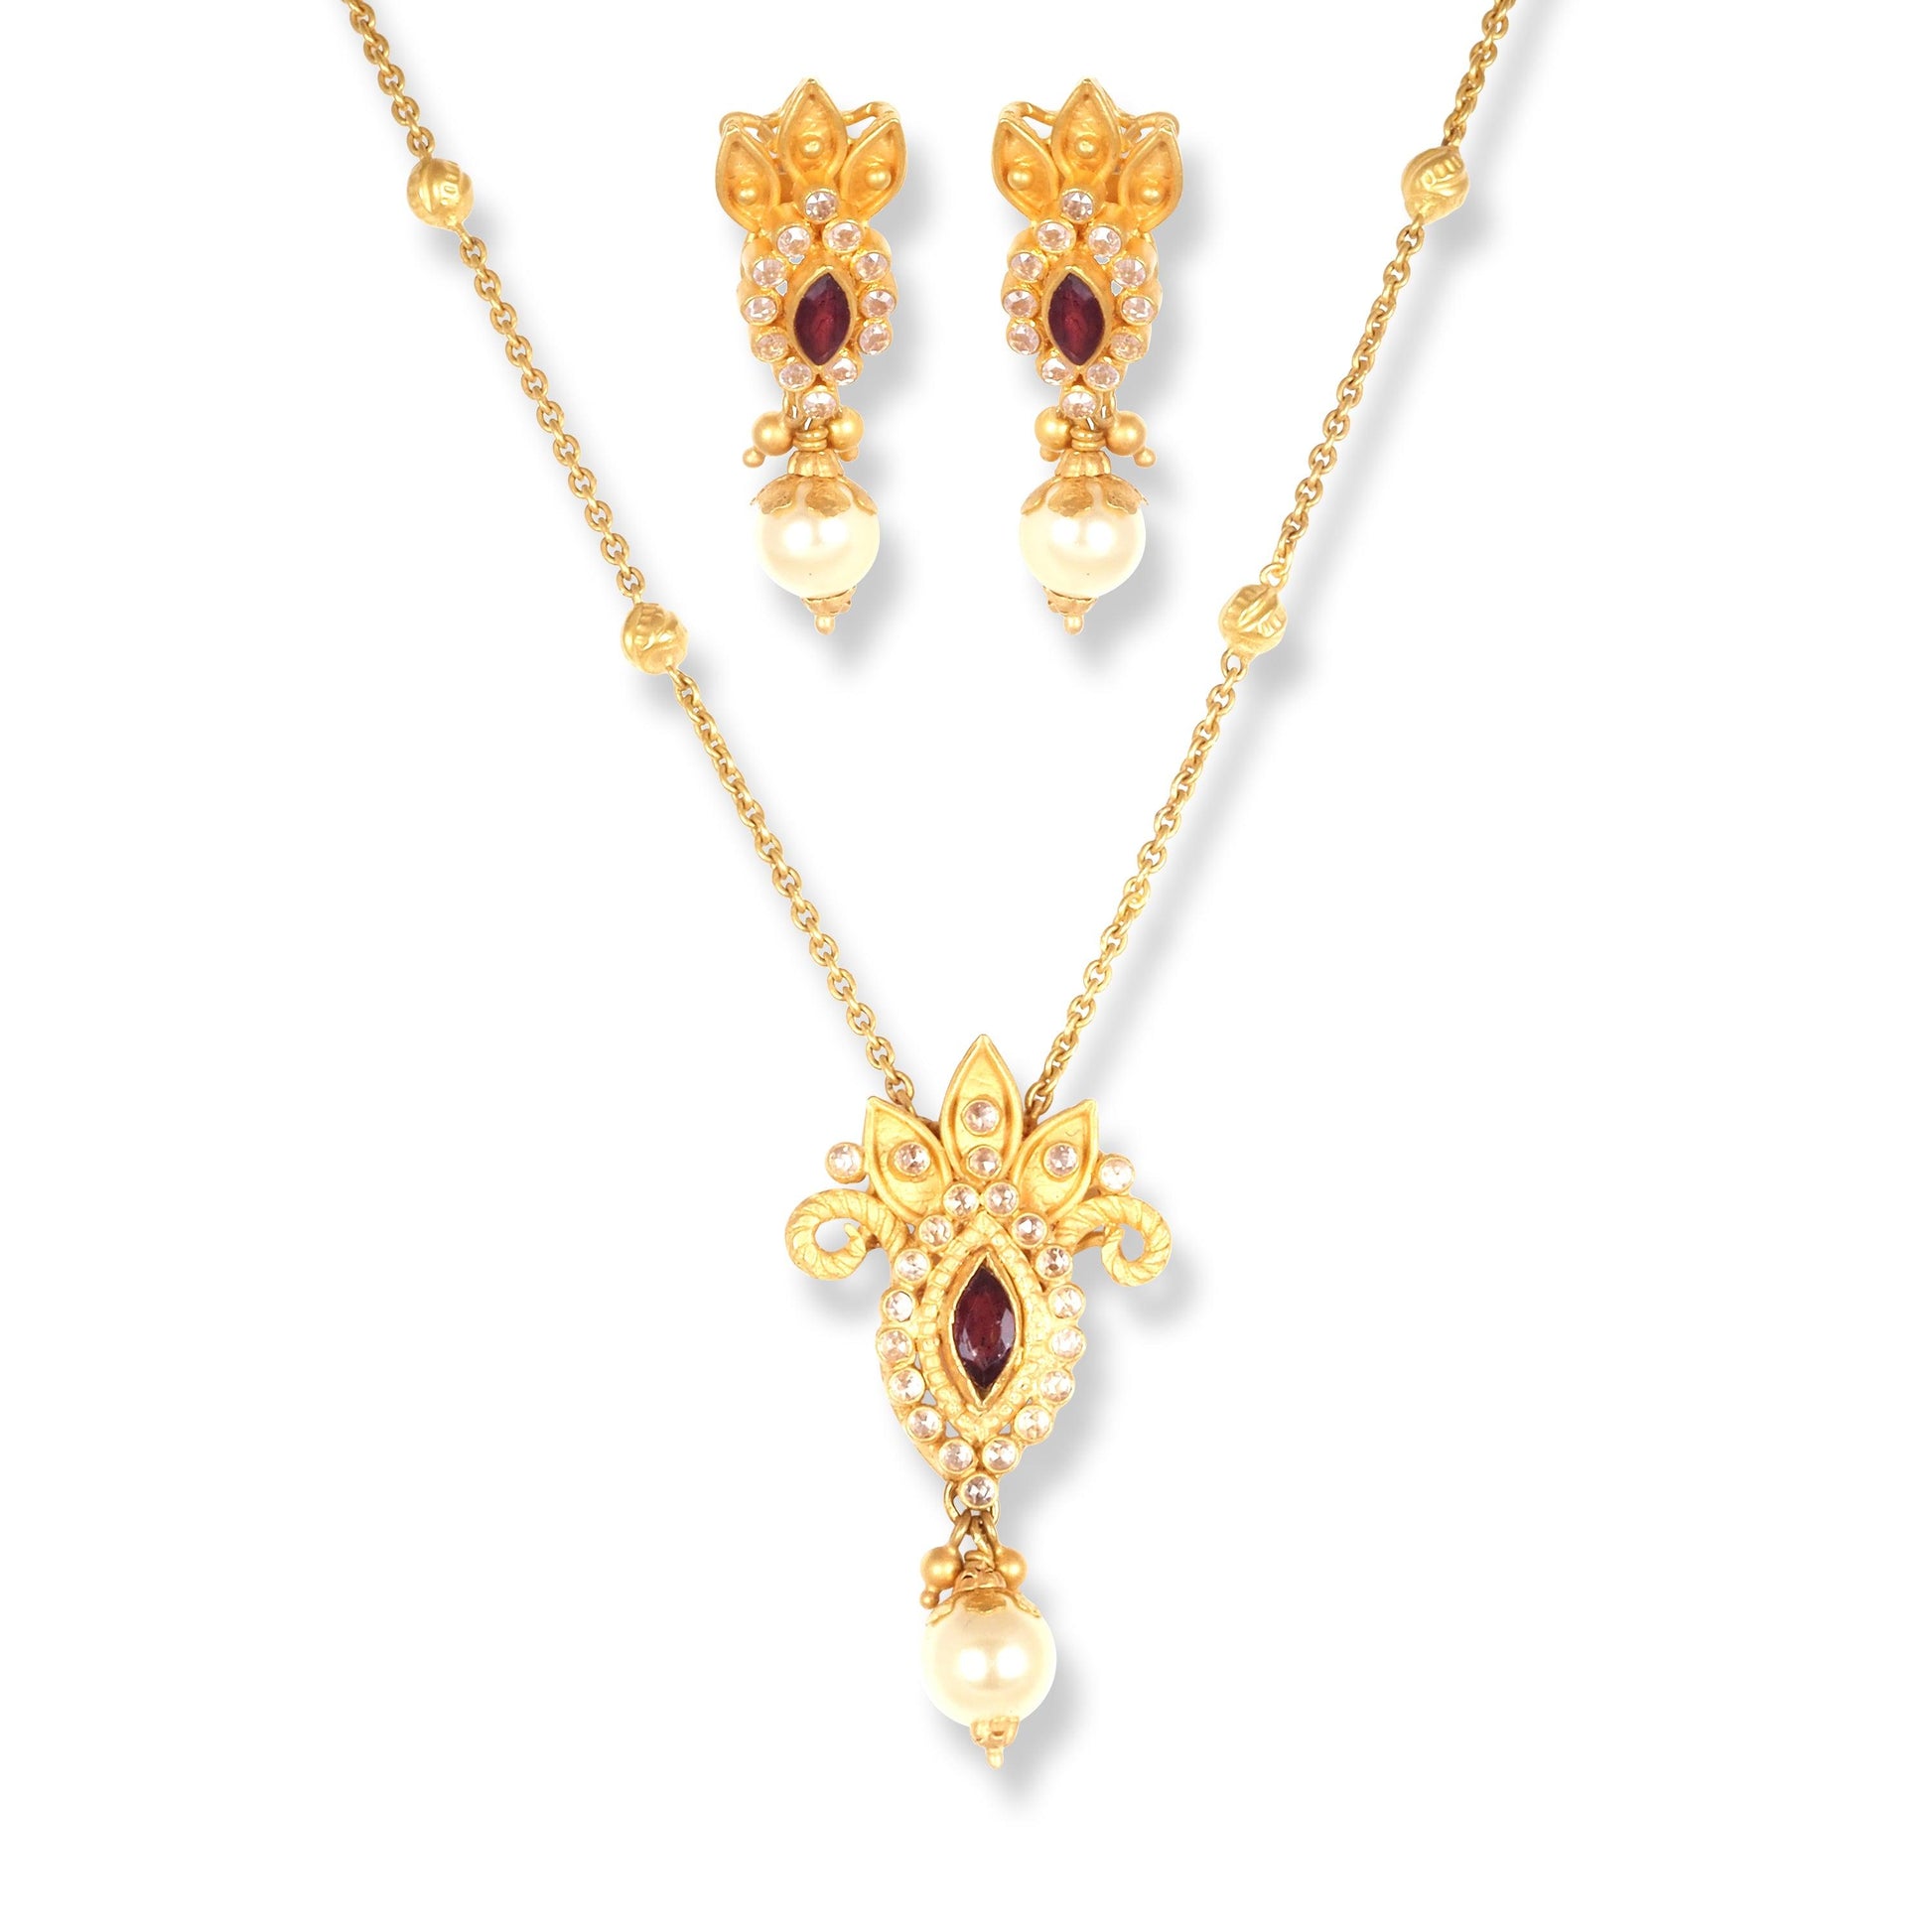 22ct Gold Set with Red & White Cubic Zirconia Stones and Cultured Pearls (Necklace + Drop Earrings) - Minar Jewellers